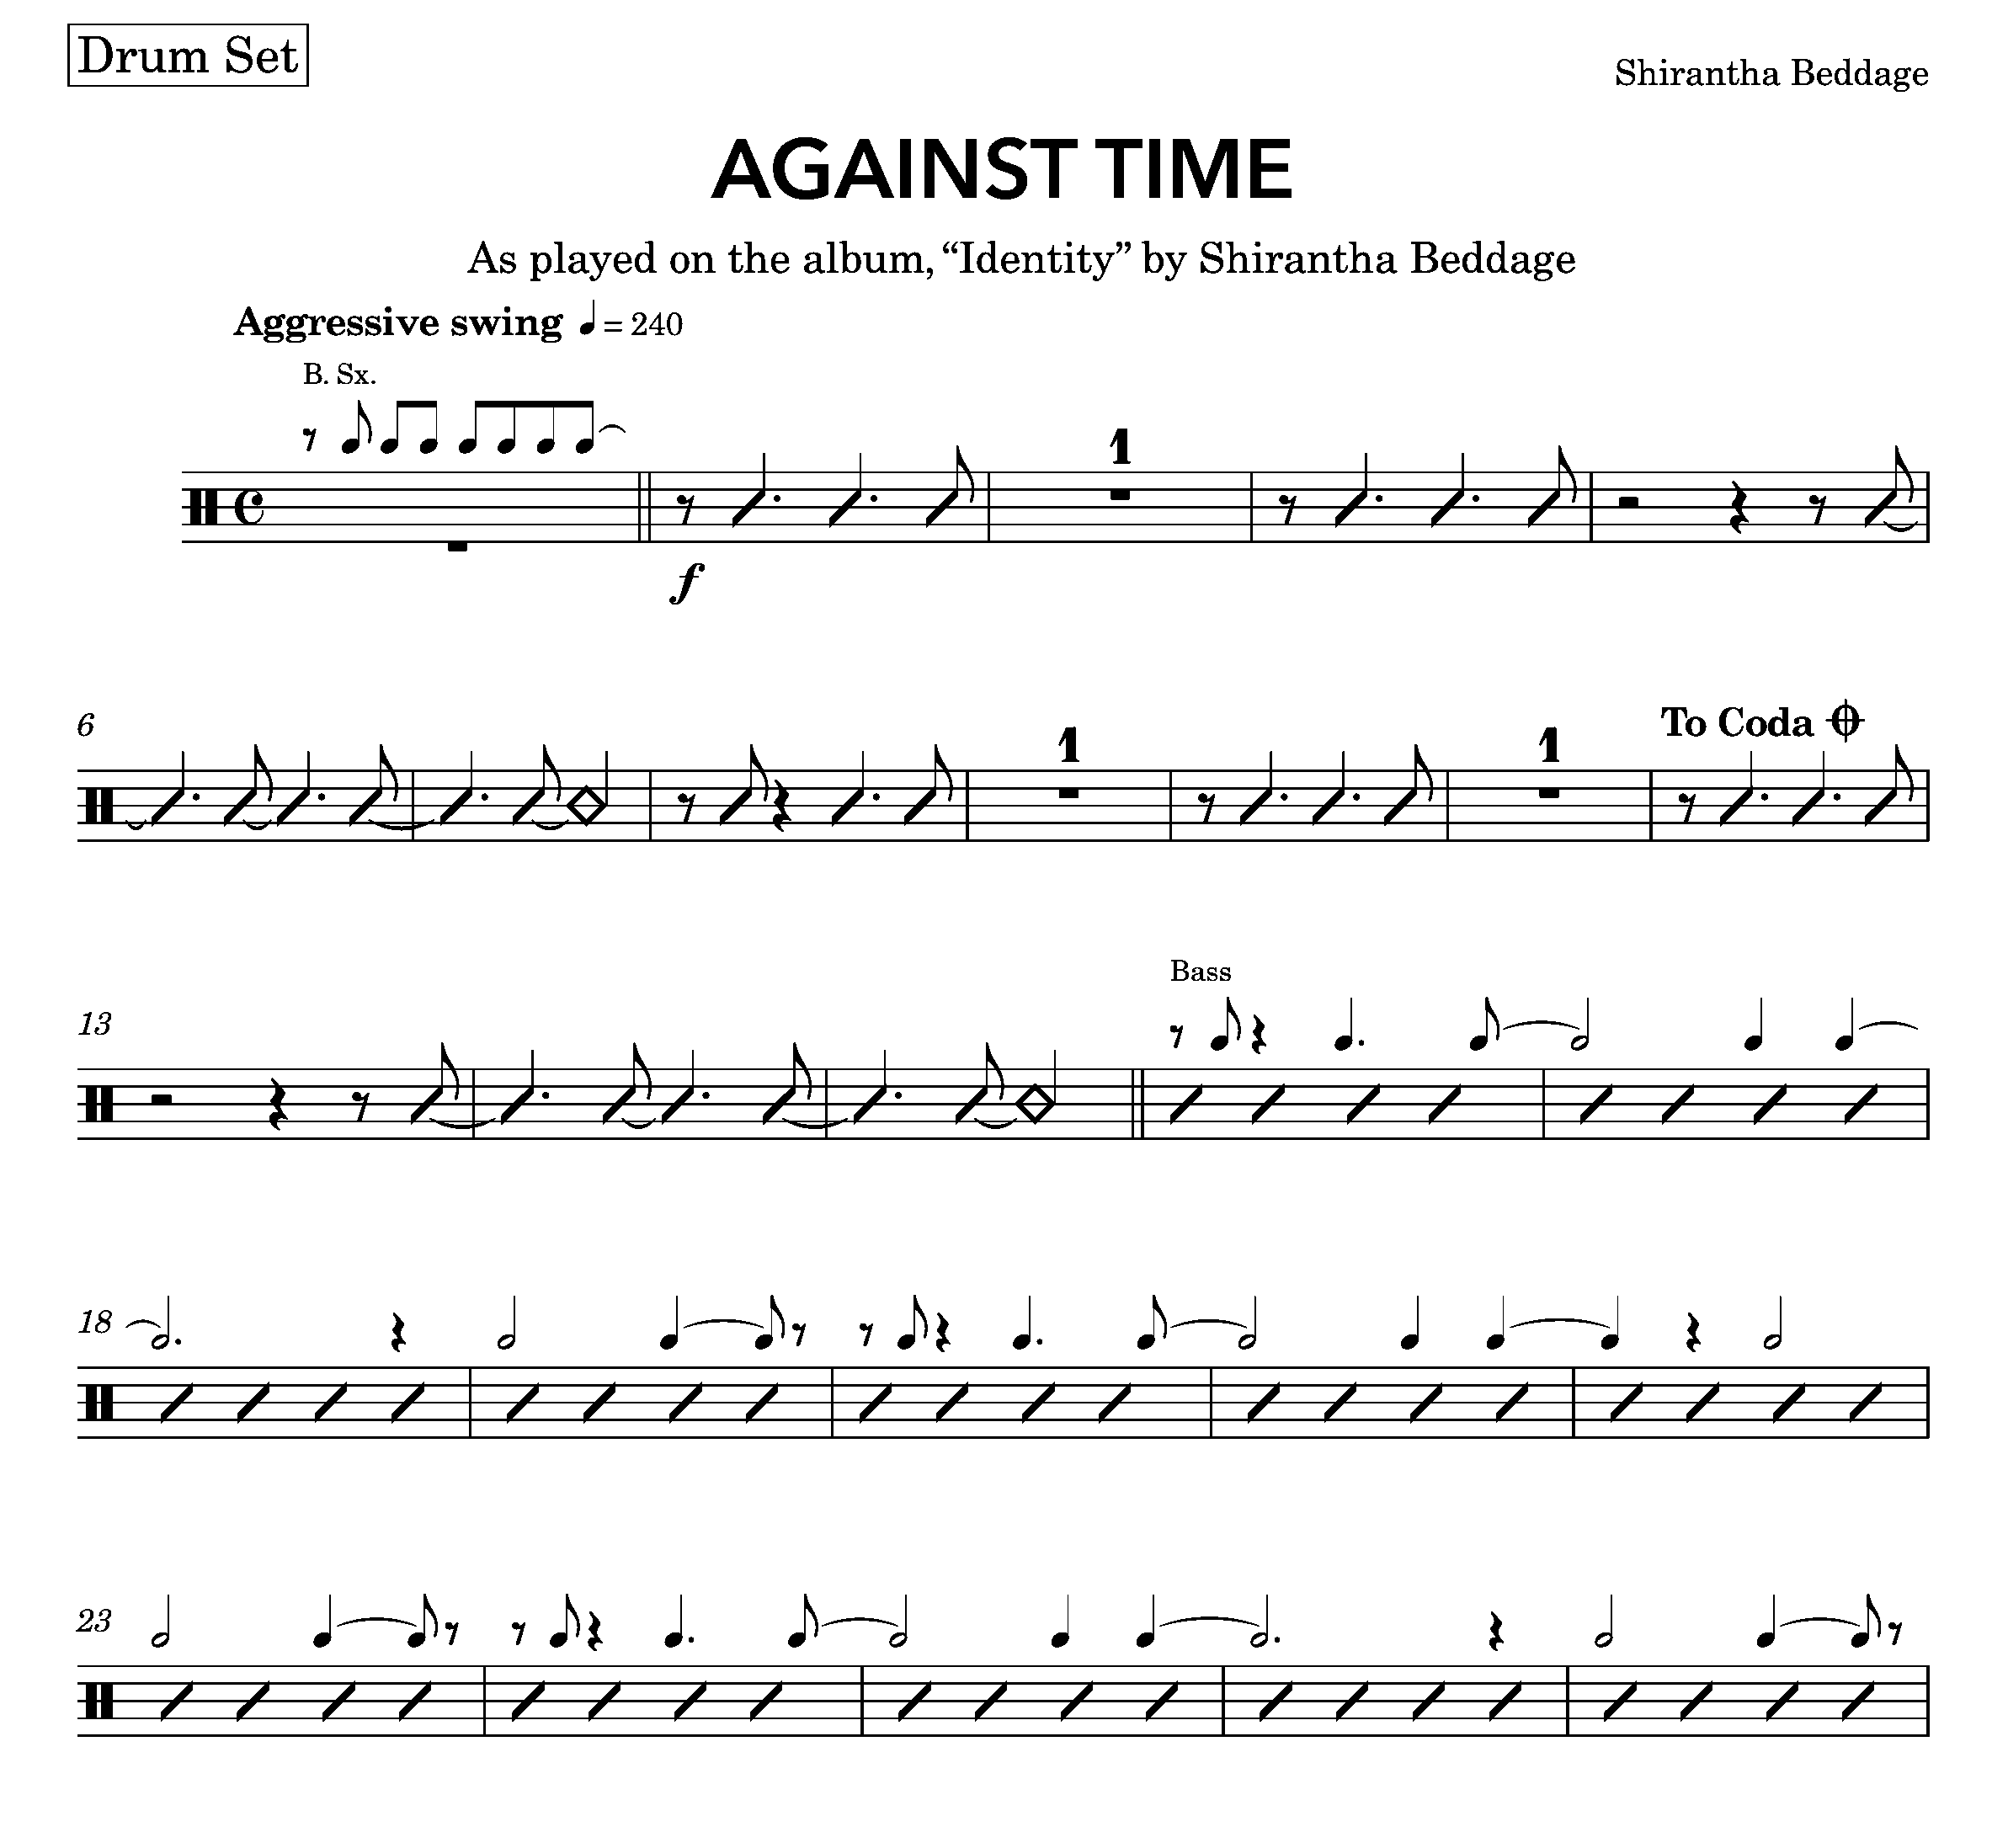 Drumset part for "Against Time"